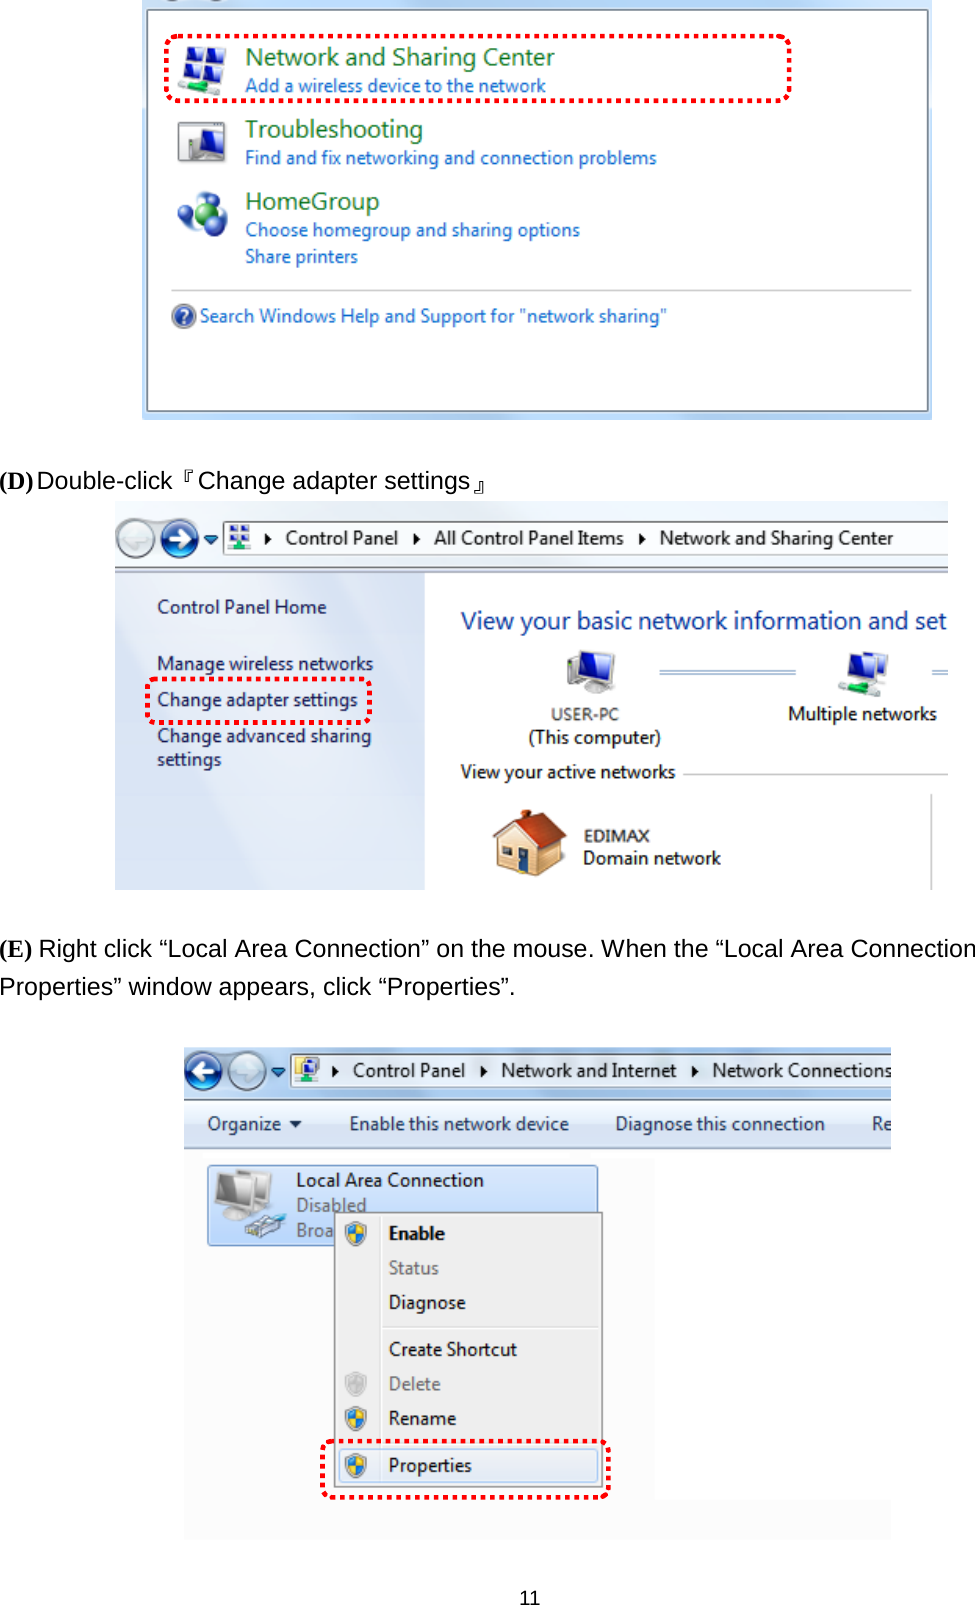 11      (D) Double-click『Change adapter settings』   (E) Right click “Local Area Connection” on the mouse. When the “Local Area Connection Properties” window appears, click “Properties”.      